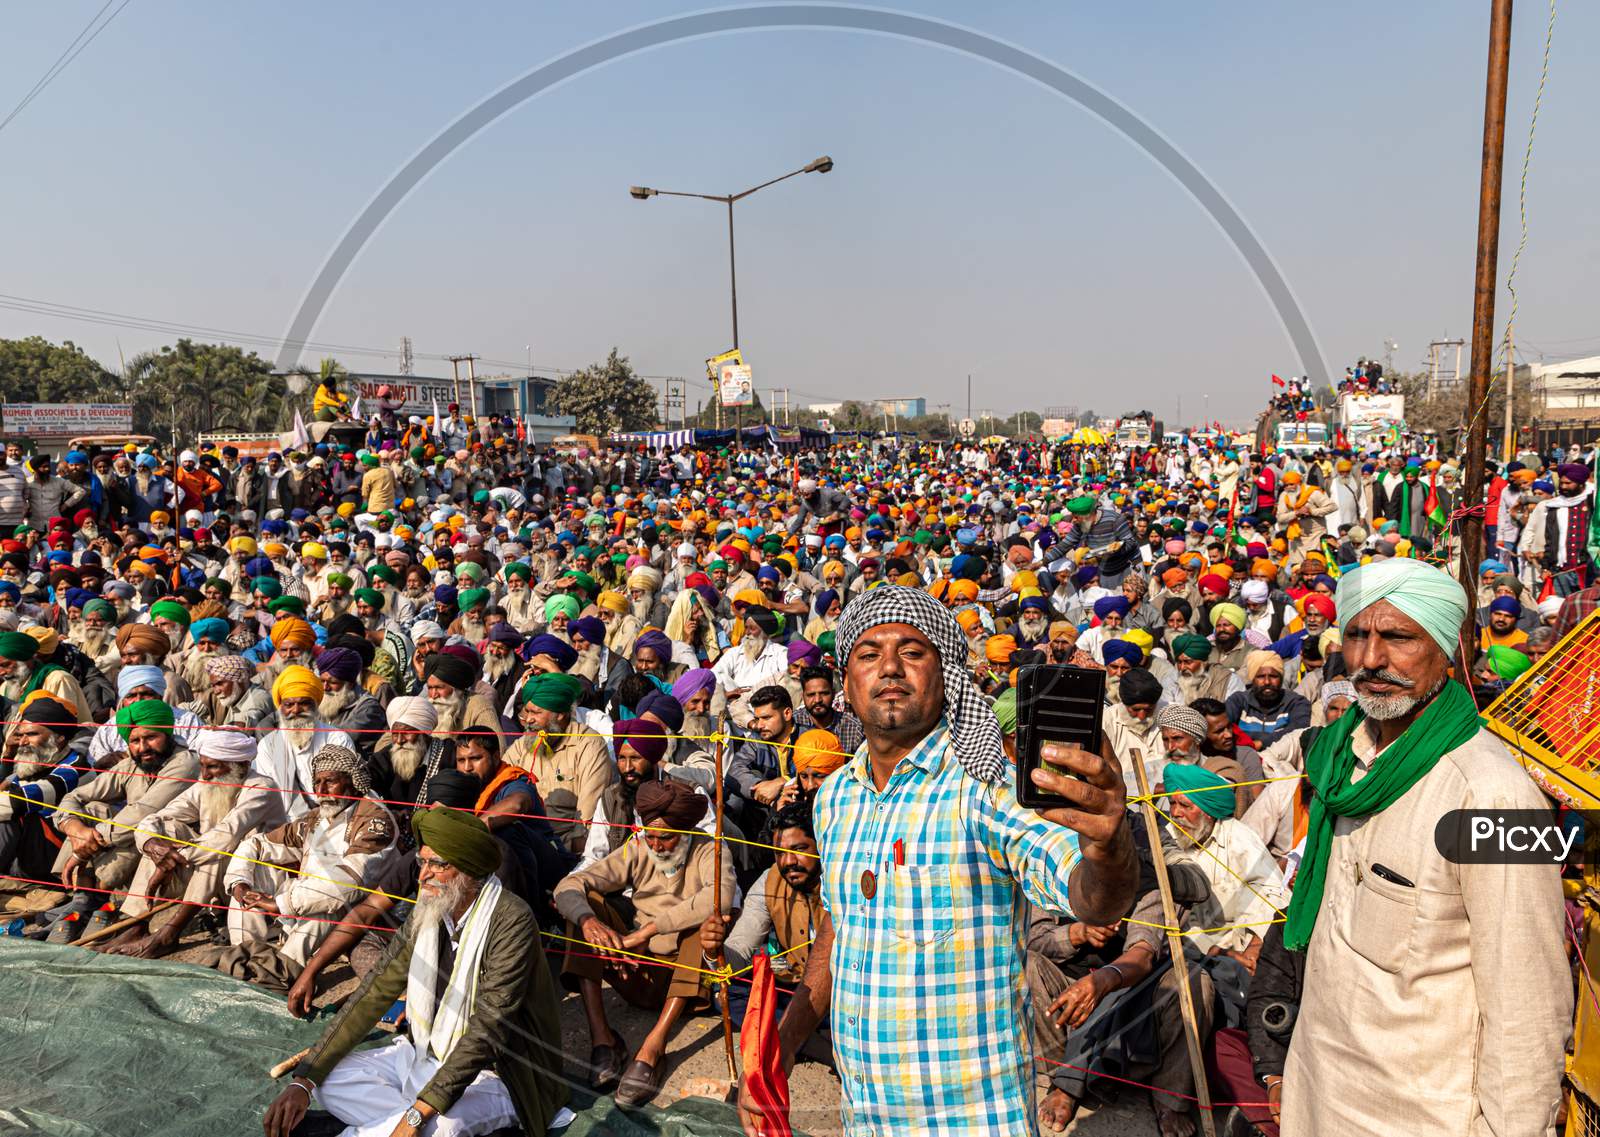 Farmers Are Protesting Against The New Farmer Law Passed By Indian Government.